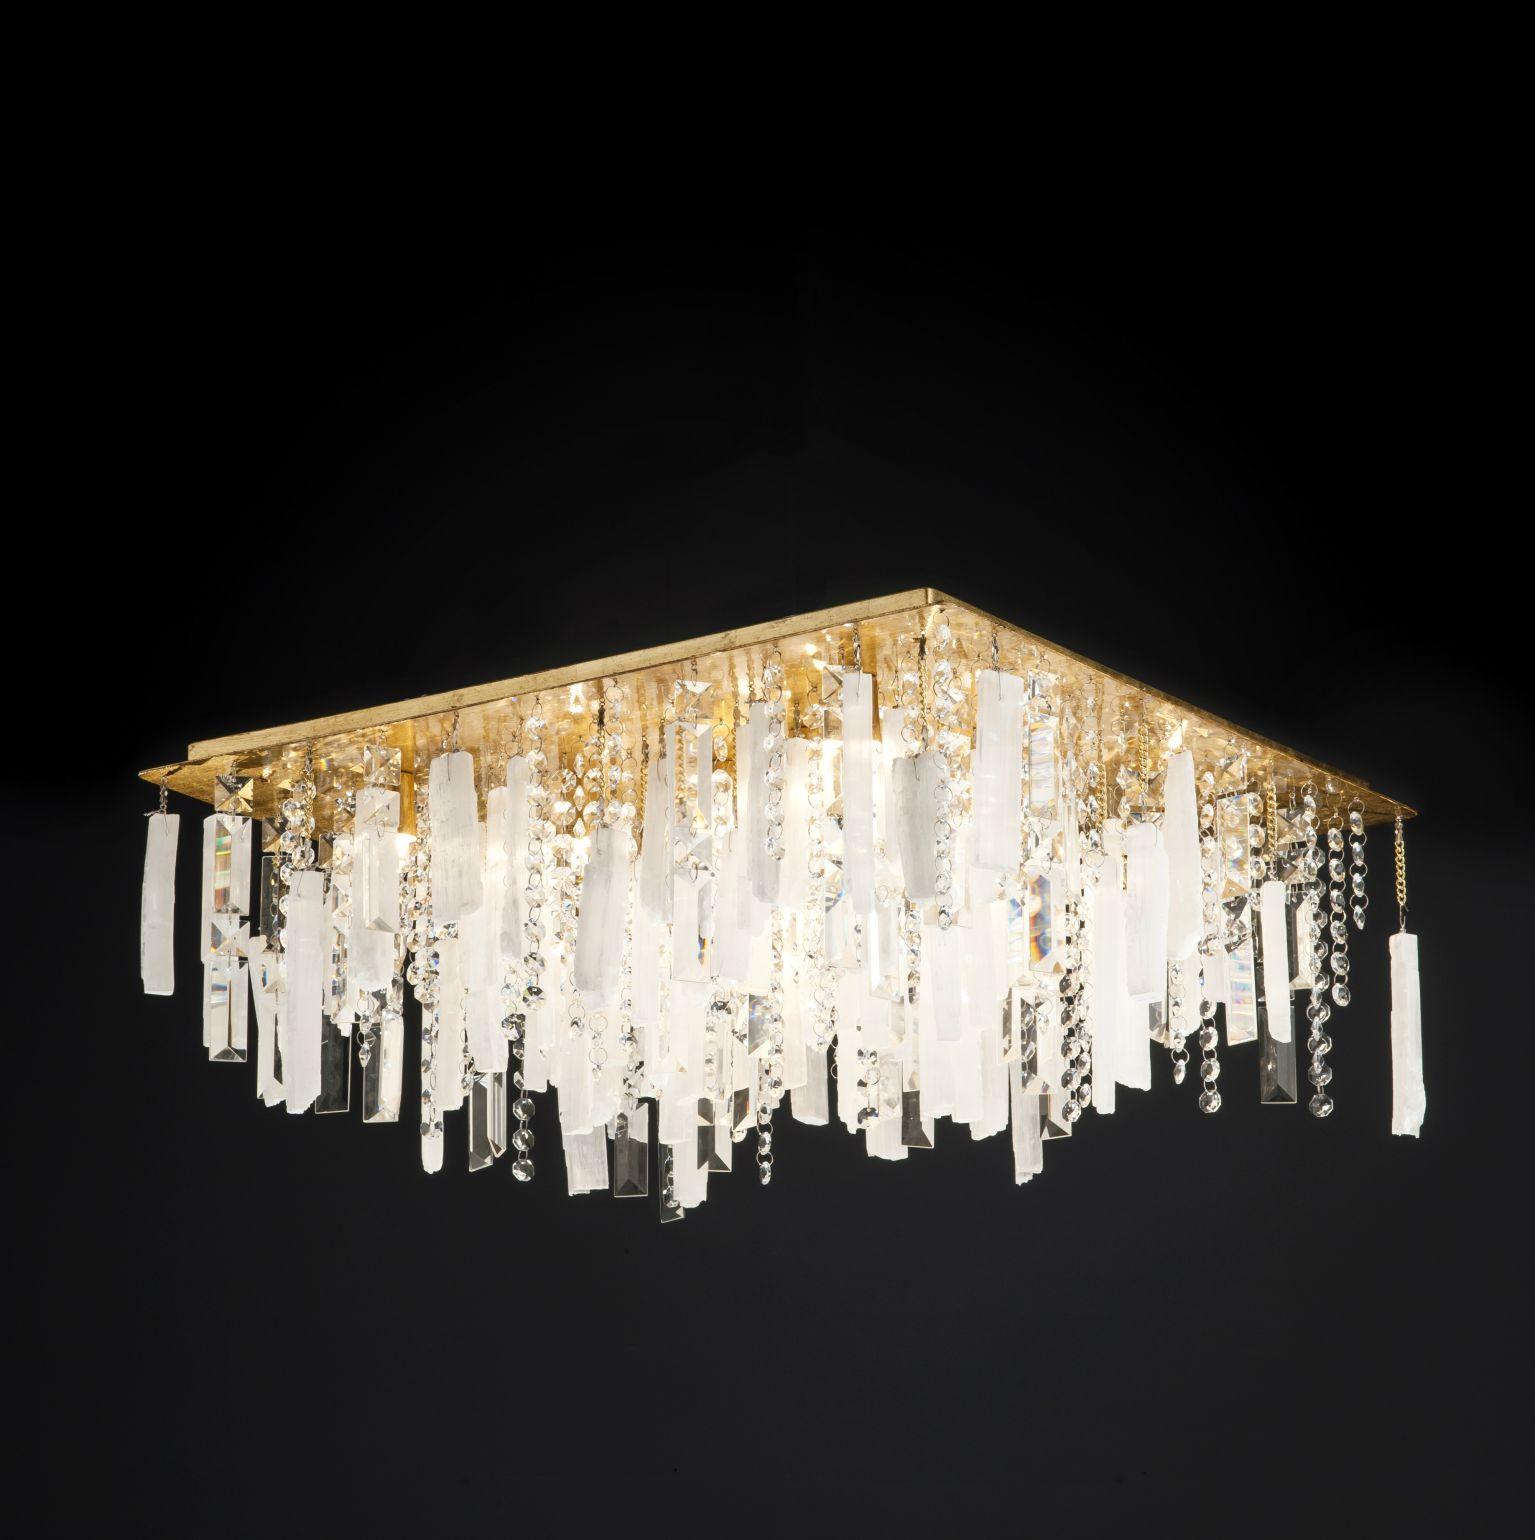 Crystal Ceiling lamp by Aver
Dimensions: D 56 x W 56 x H 18 cm 
Materials: Crystal, metal.
Lighting: 12 x G9
Available in finishes: Silver Plated, Aged Silver Plated, Gold Plated, Aged Gold Plated. 

All our lamps can be wired according to